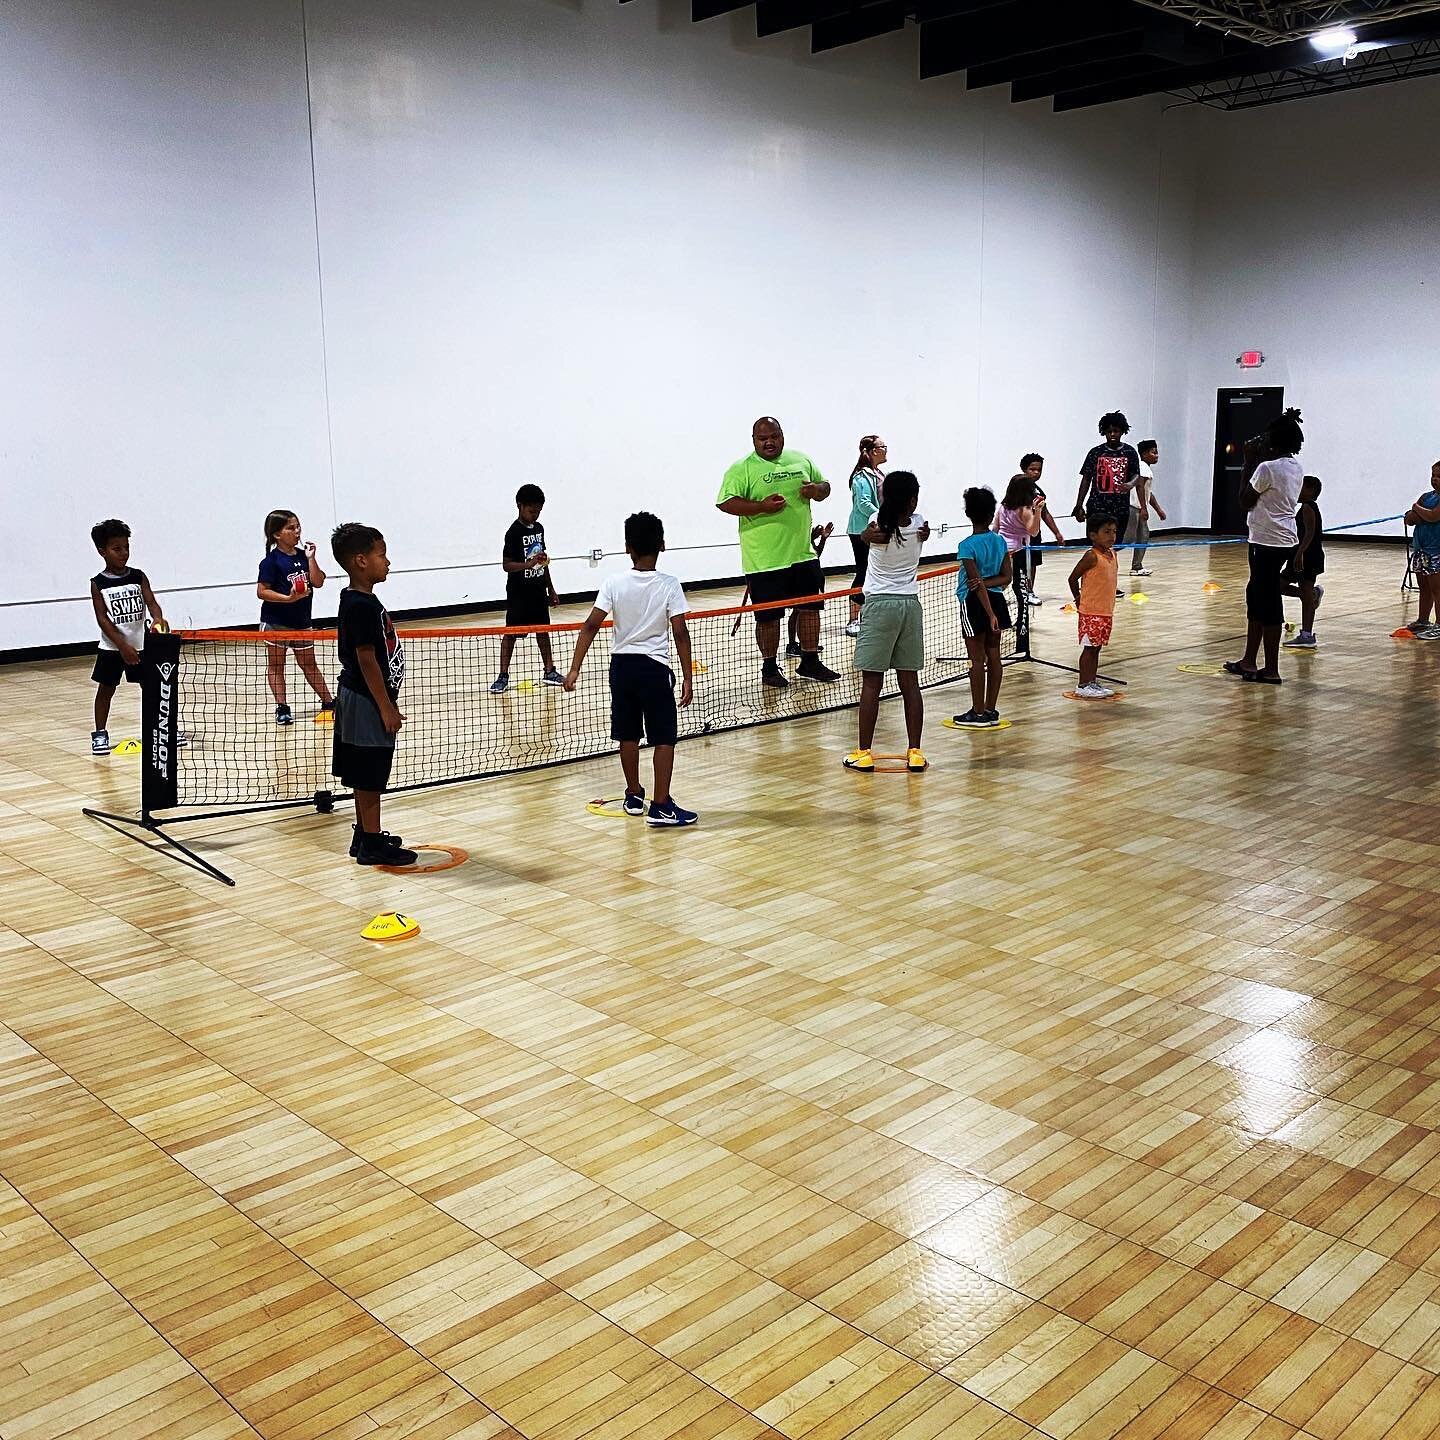 CoMotion has a performance space and it couples as a activity room. This week @comotioncenter and @element.gym are teaming up with @stpaulurbantennis for a FREE 4 day Tennis and Fitness camp. More than 25 kids were in attendance today. Day 3 tomorrow